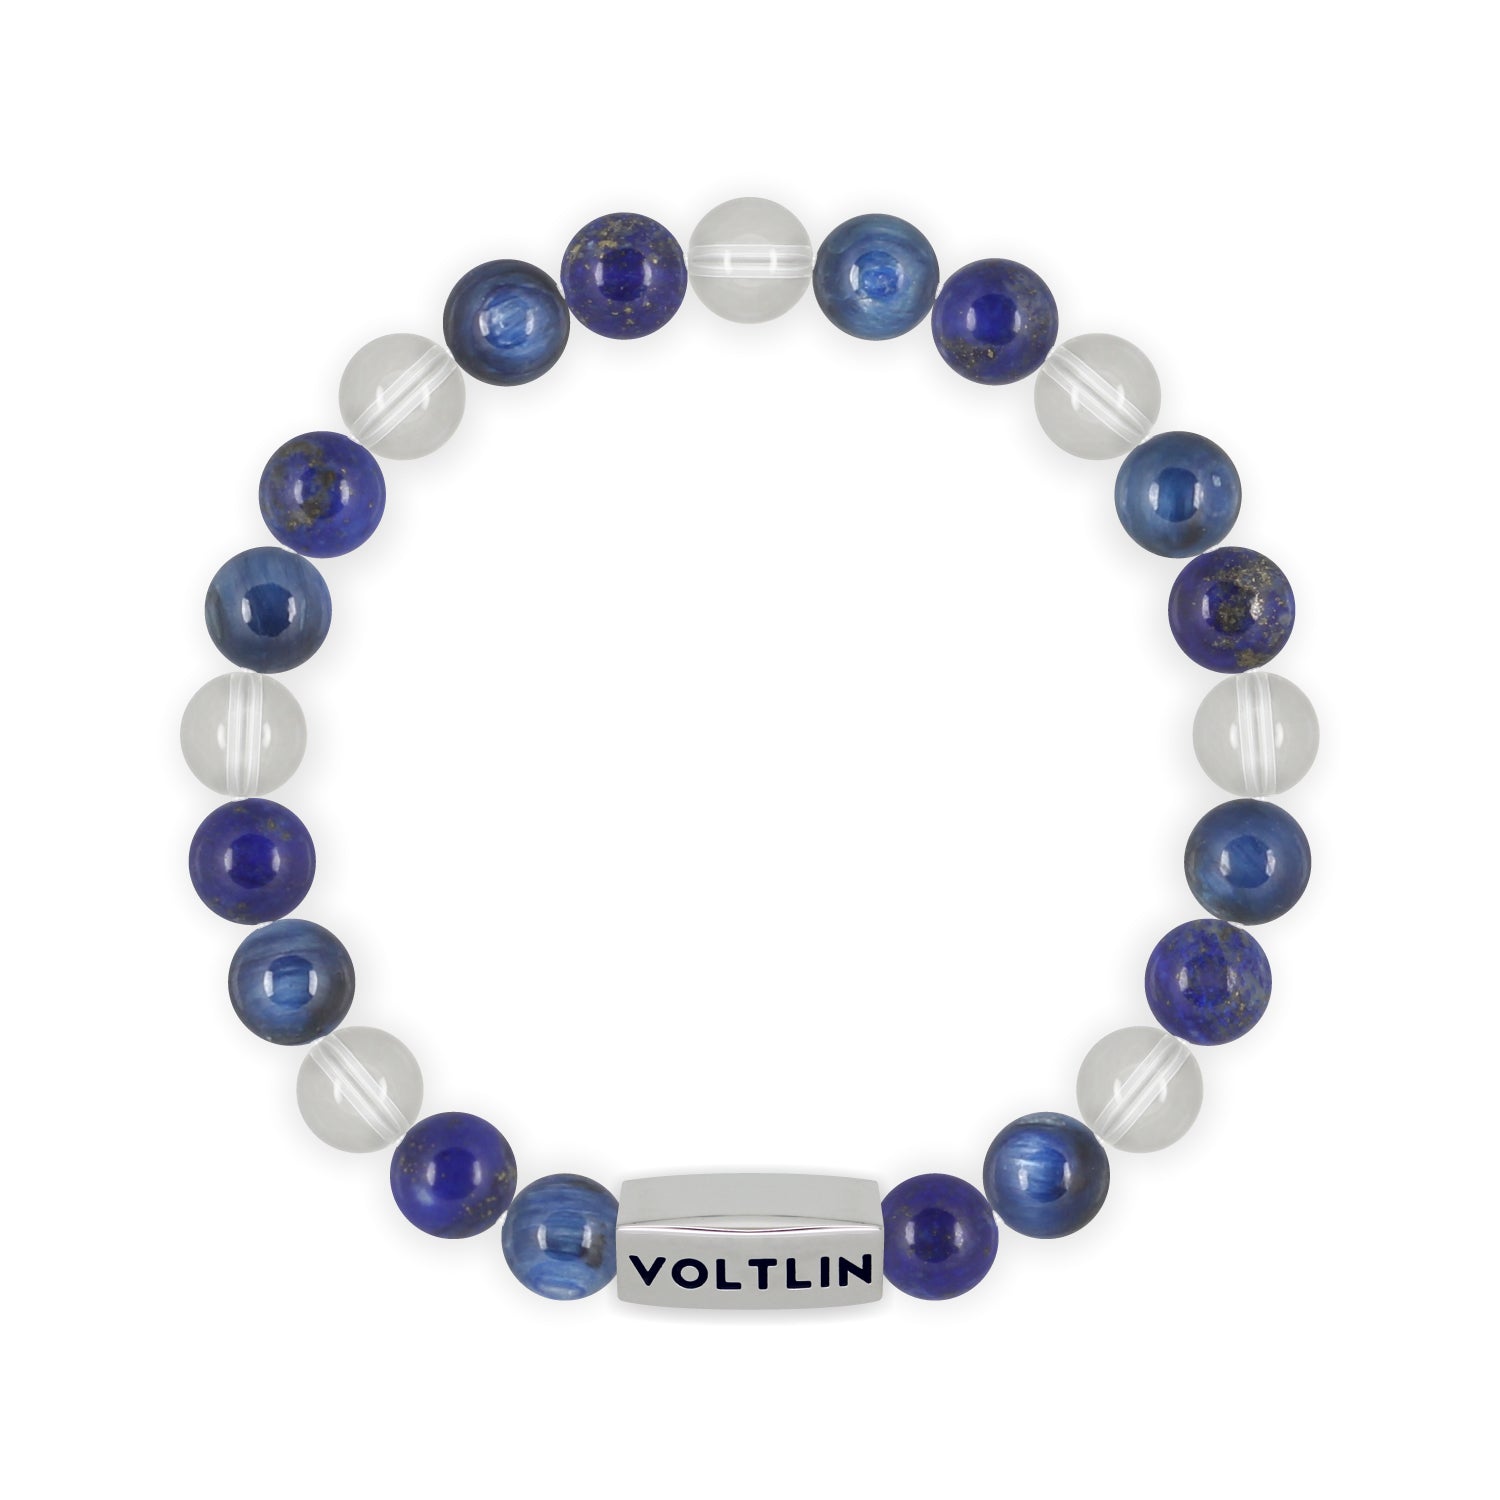 Front view of an 8mm Taurus Zodiac beaded stretch bracelet featuring Lapis Lazuli, Kyanite, & Quartz crystal and silver stainless steel logo bead made by Voltlin